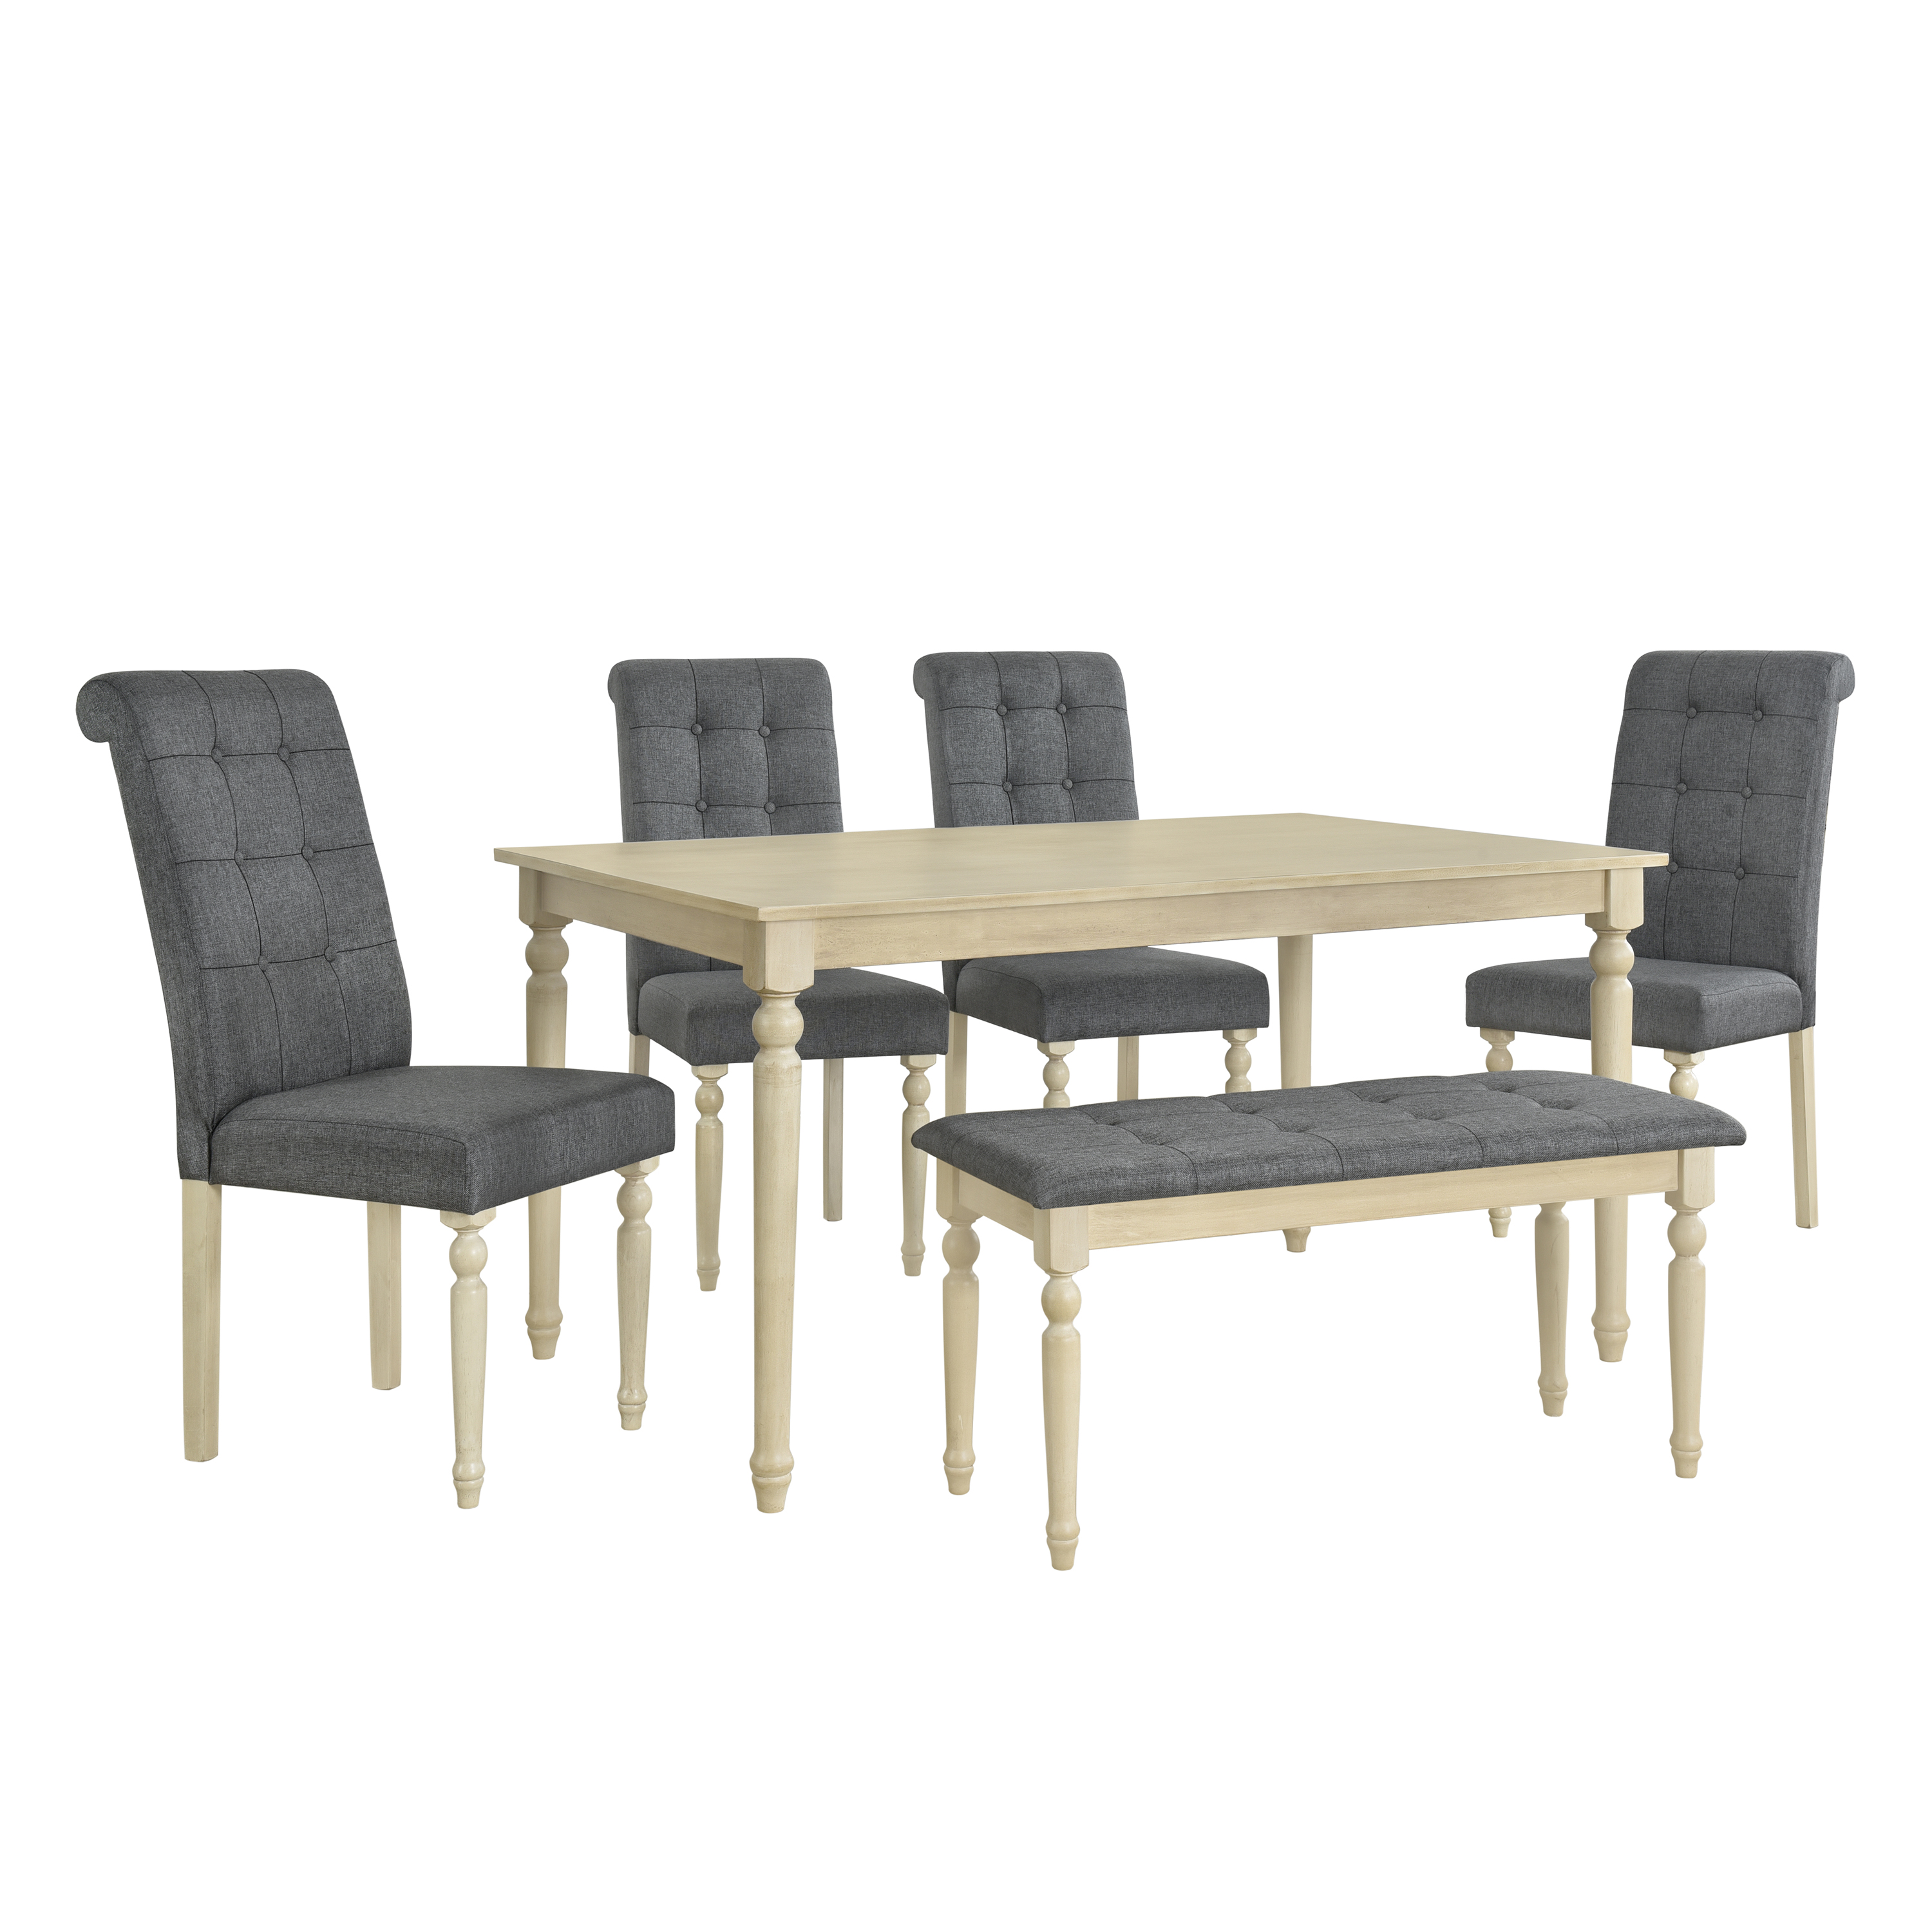  6 Piece Dining Table set with Tufted Bench,Wooden Kitchen Table Set w/ 4 Upholstered Dining Chairs,Gray-CASAINC